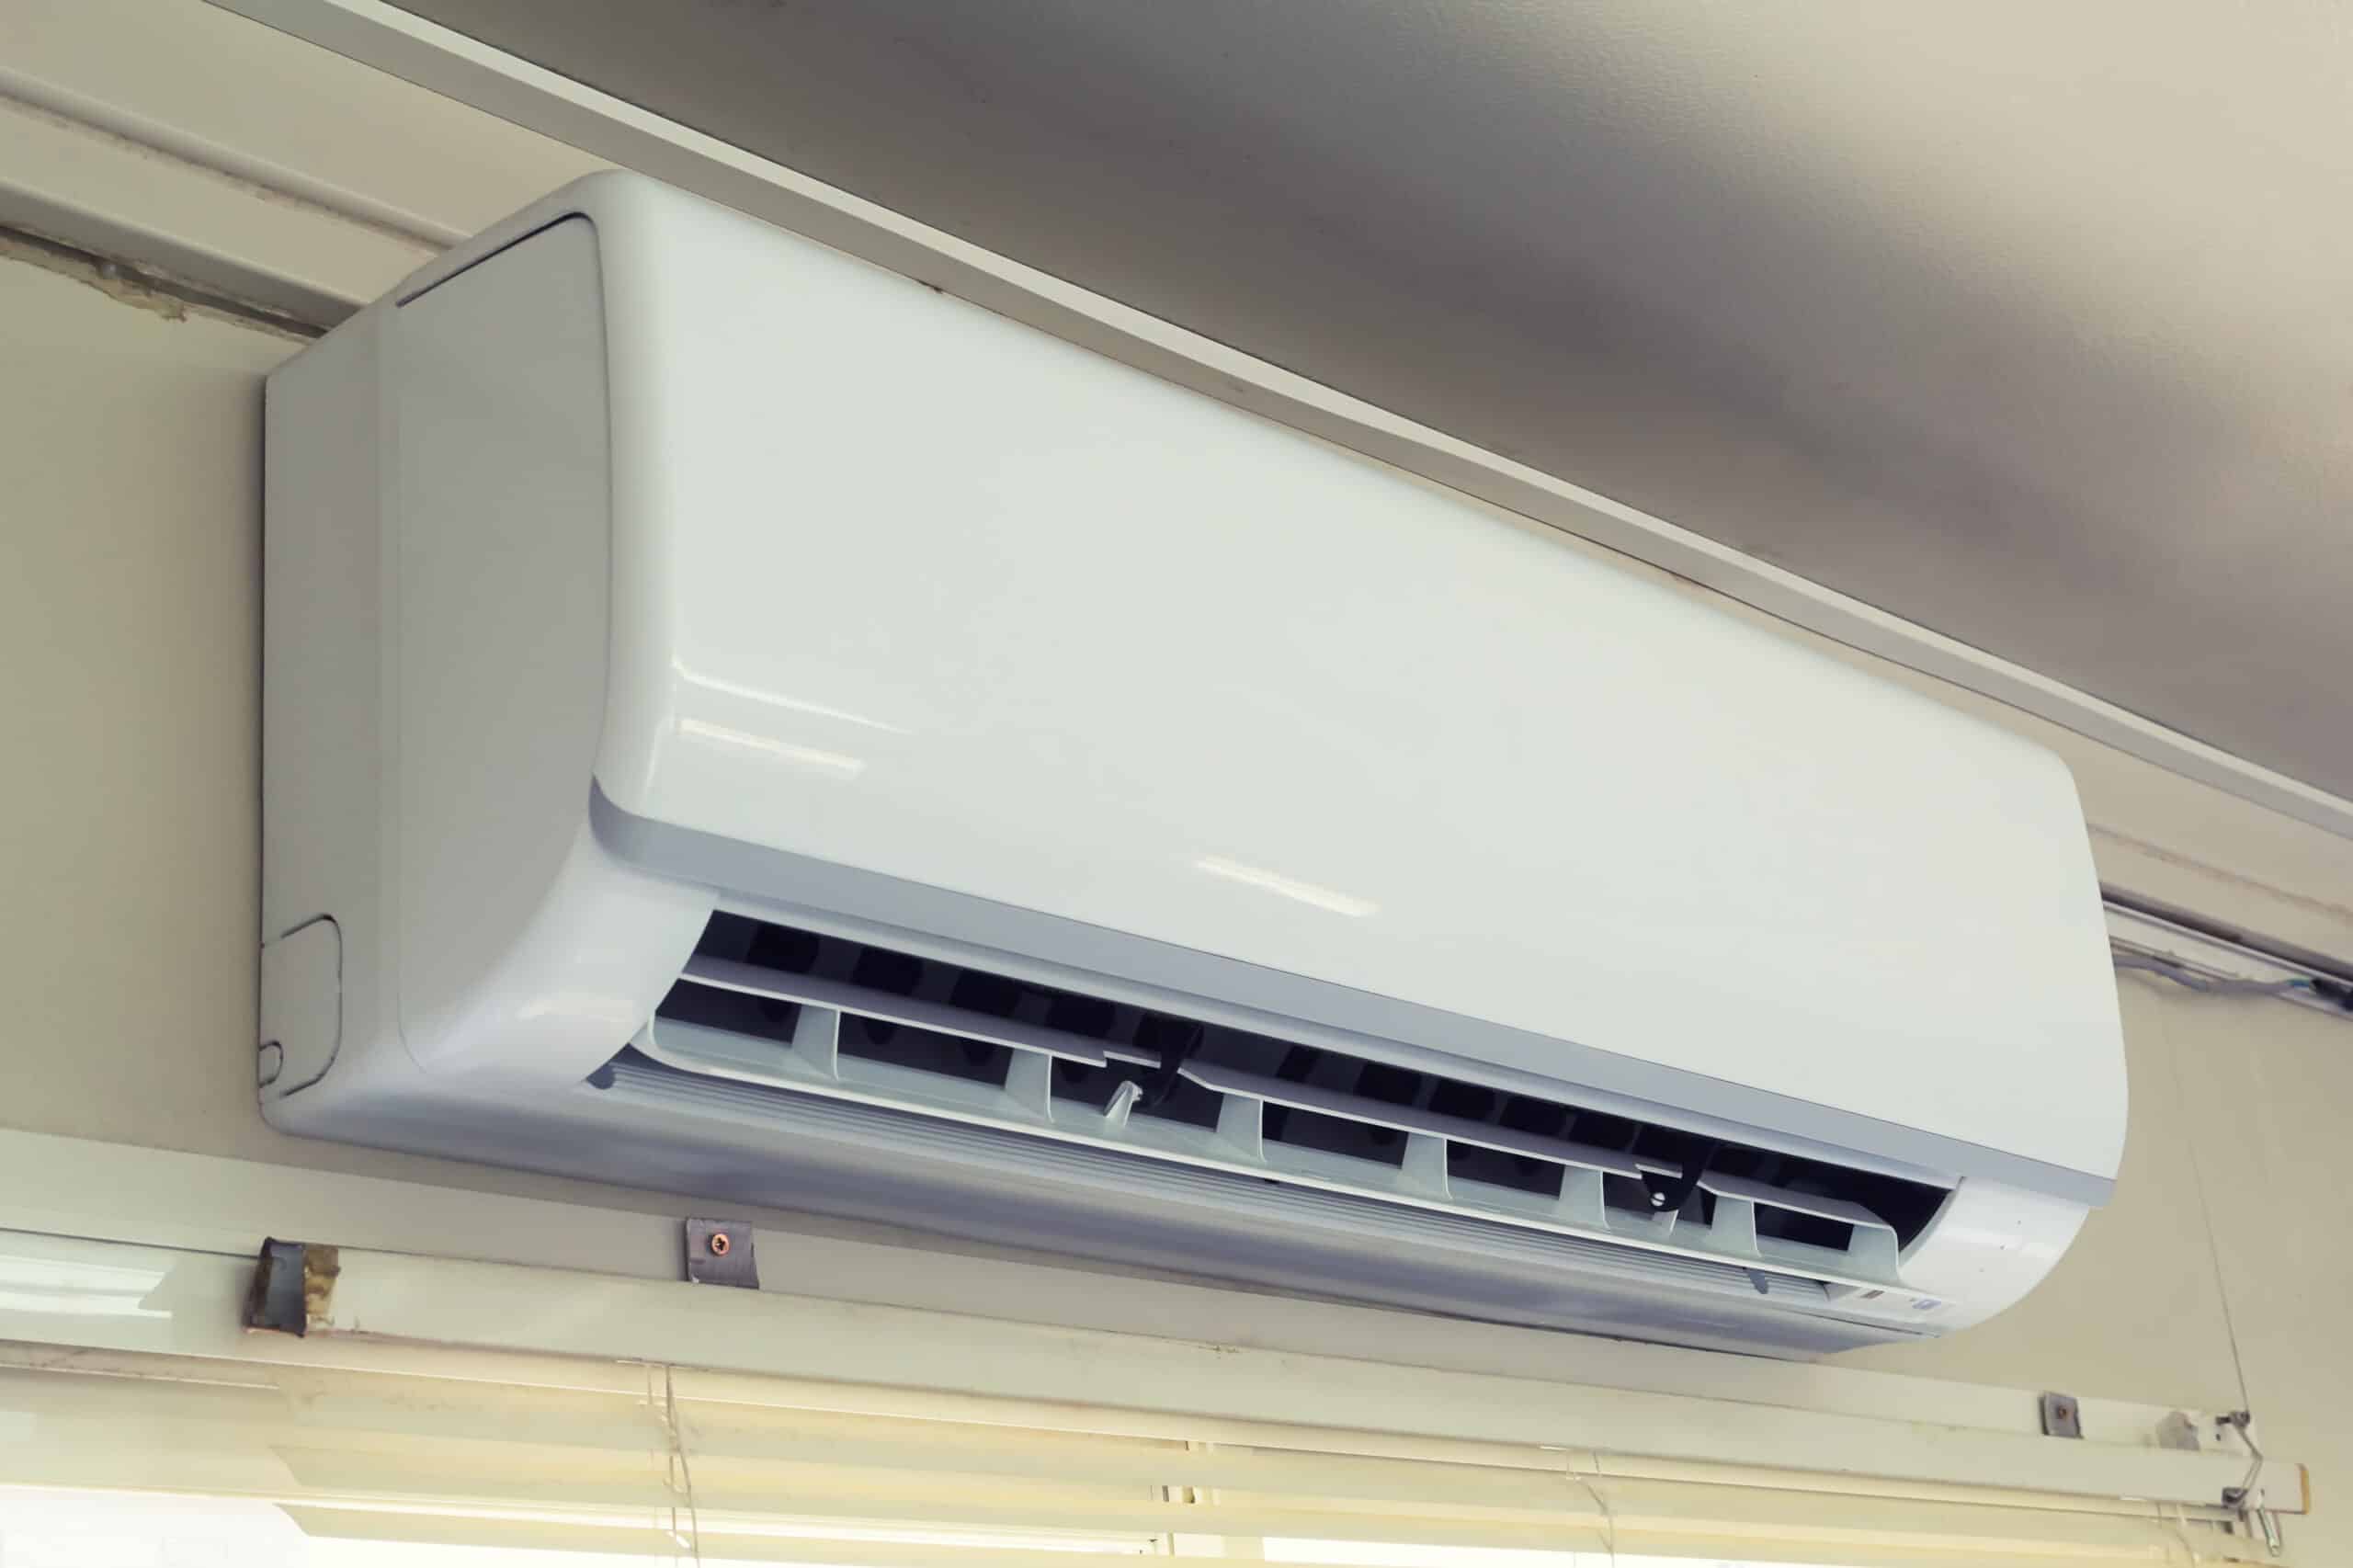 Why Buy a Ductless HVAC System